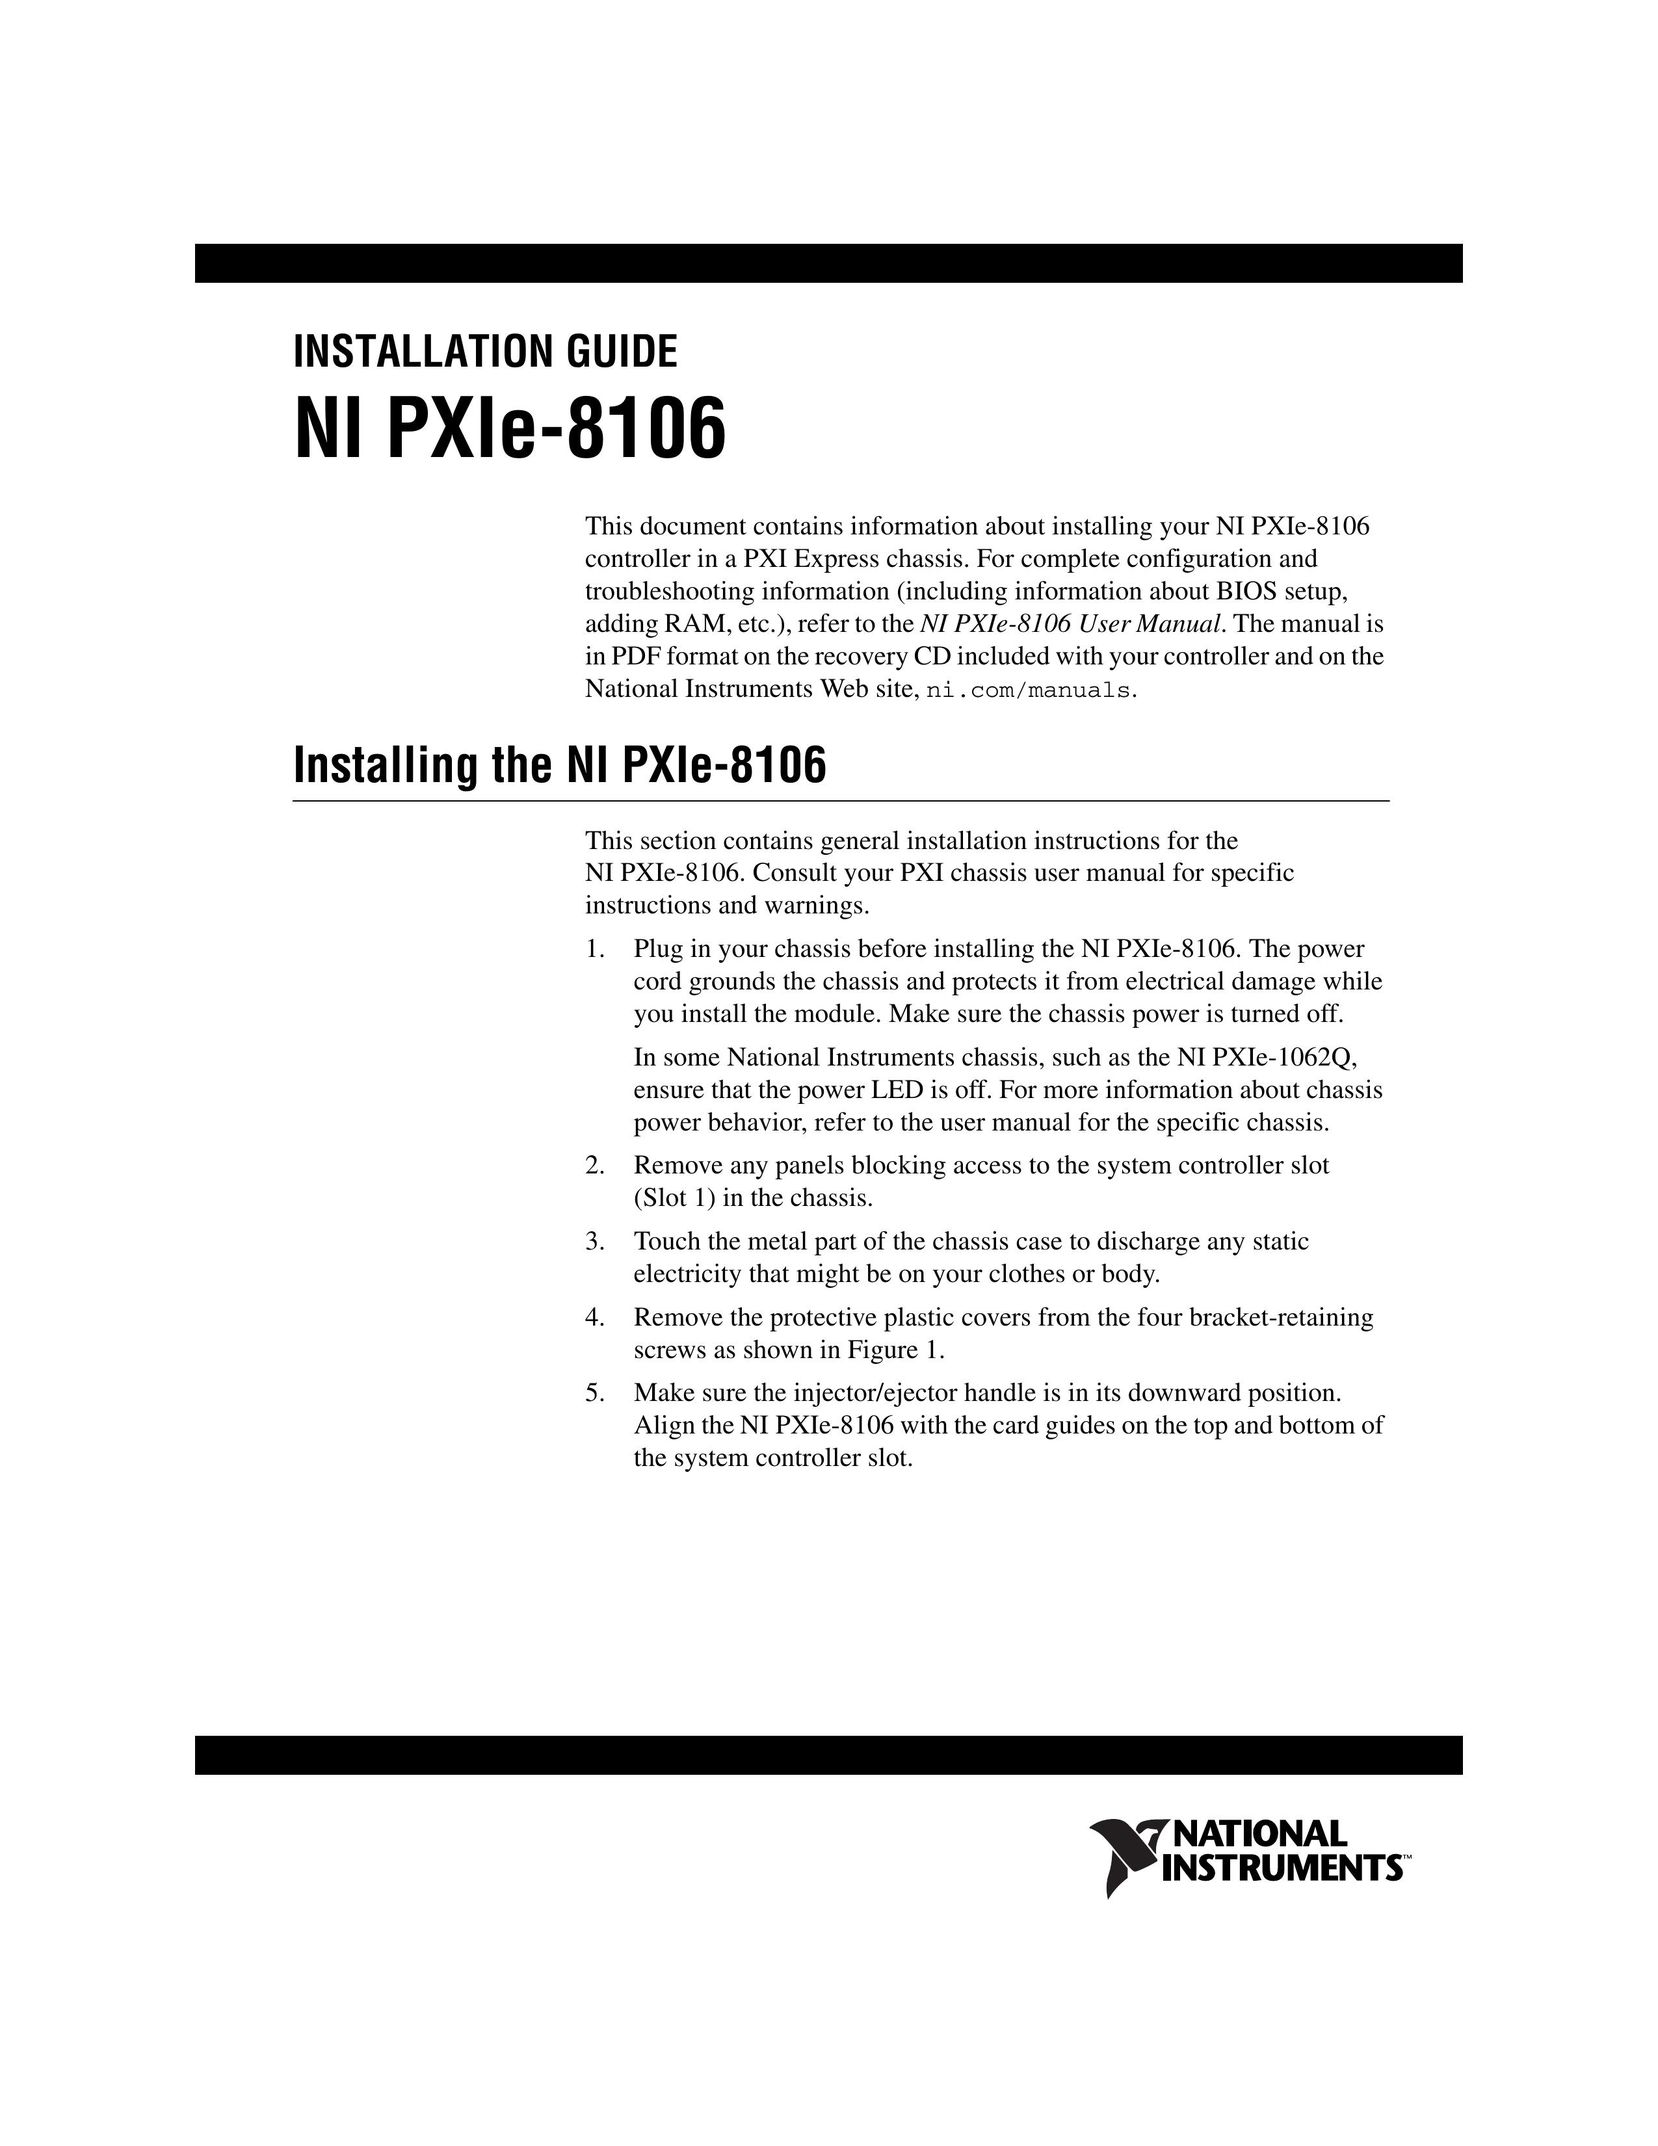 National Instruments NI PXIe-8106 TV Video Accessories User Manual